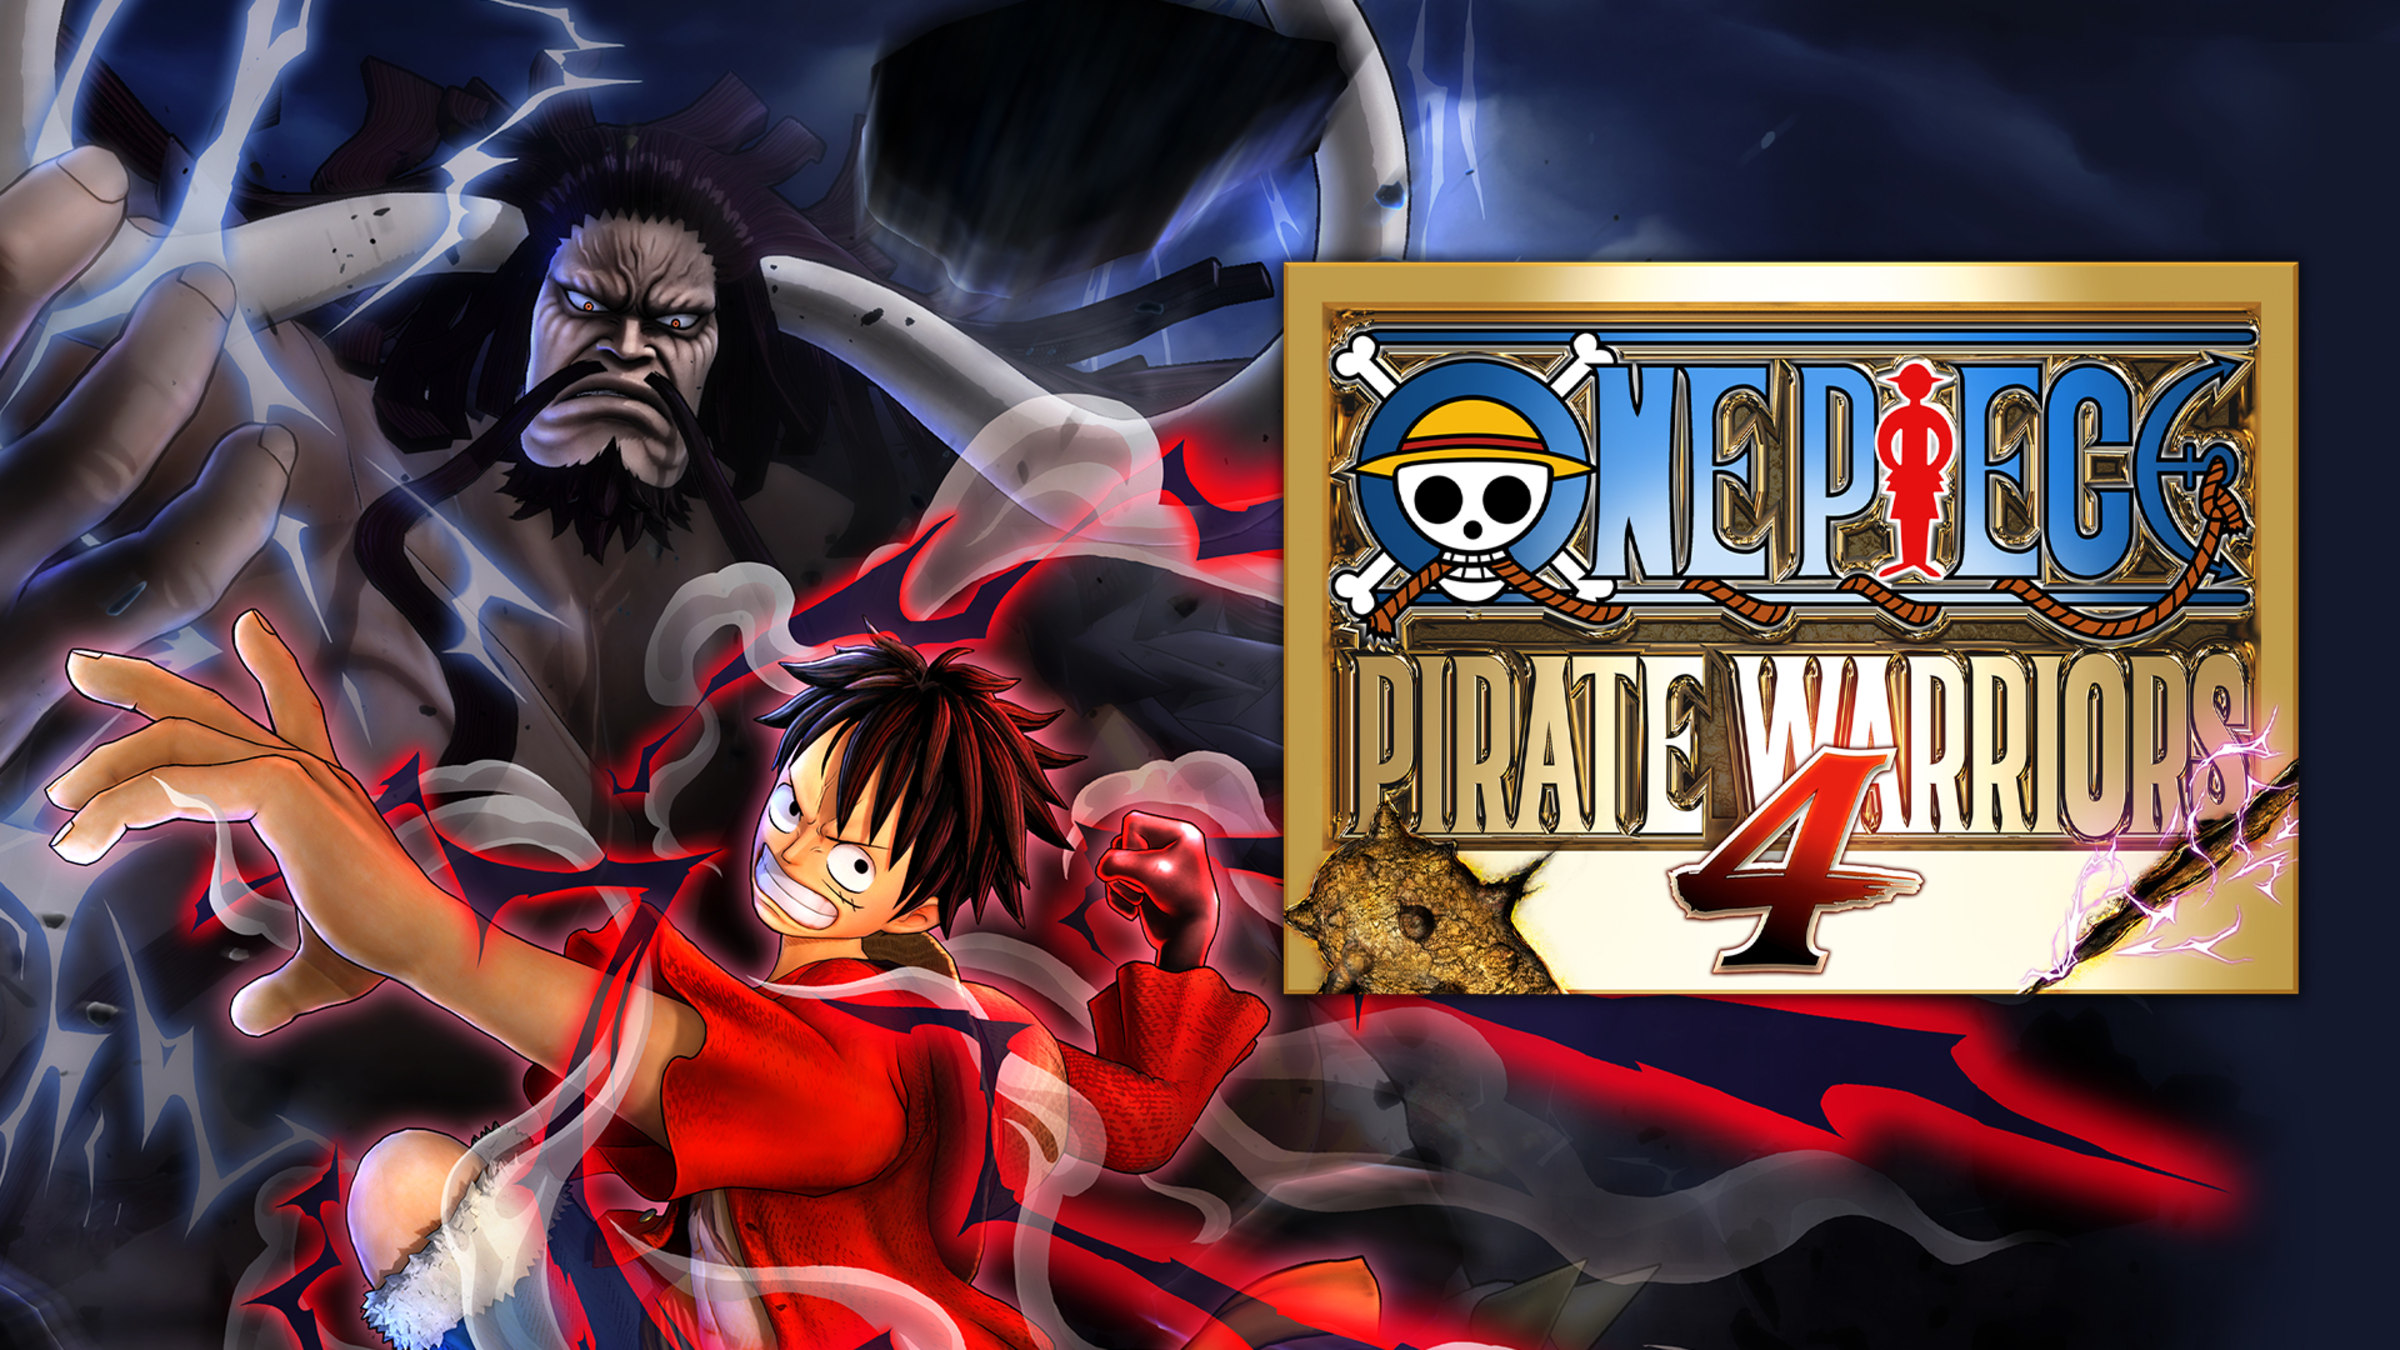 ONE PIECE: PIRATE WARRIORS 4 for Nintendo Switch - Nintendo Official Site